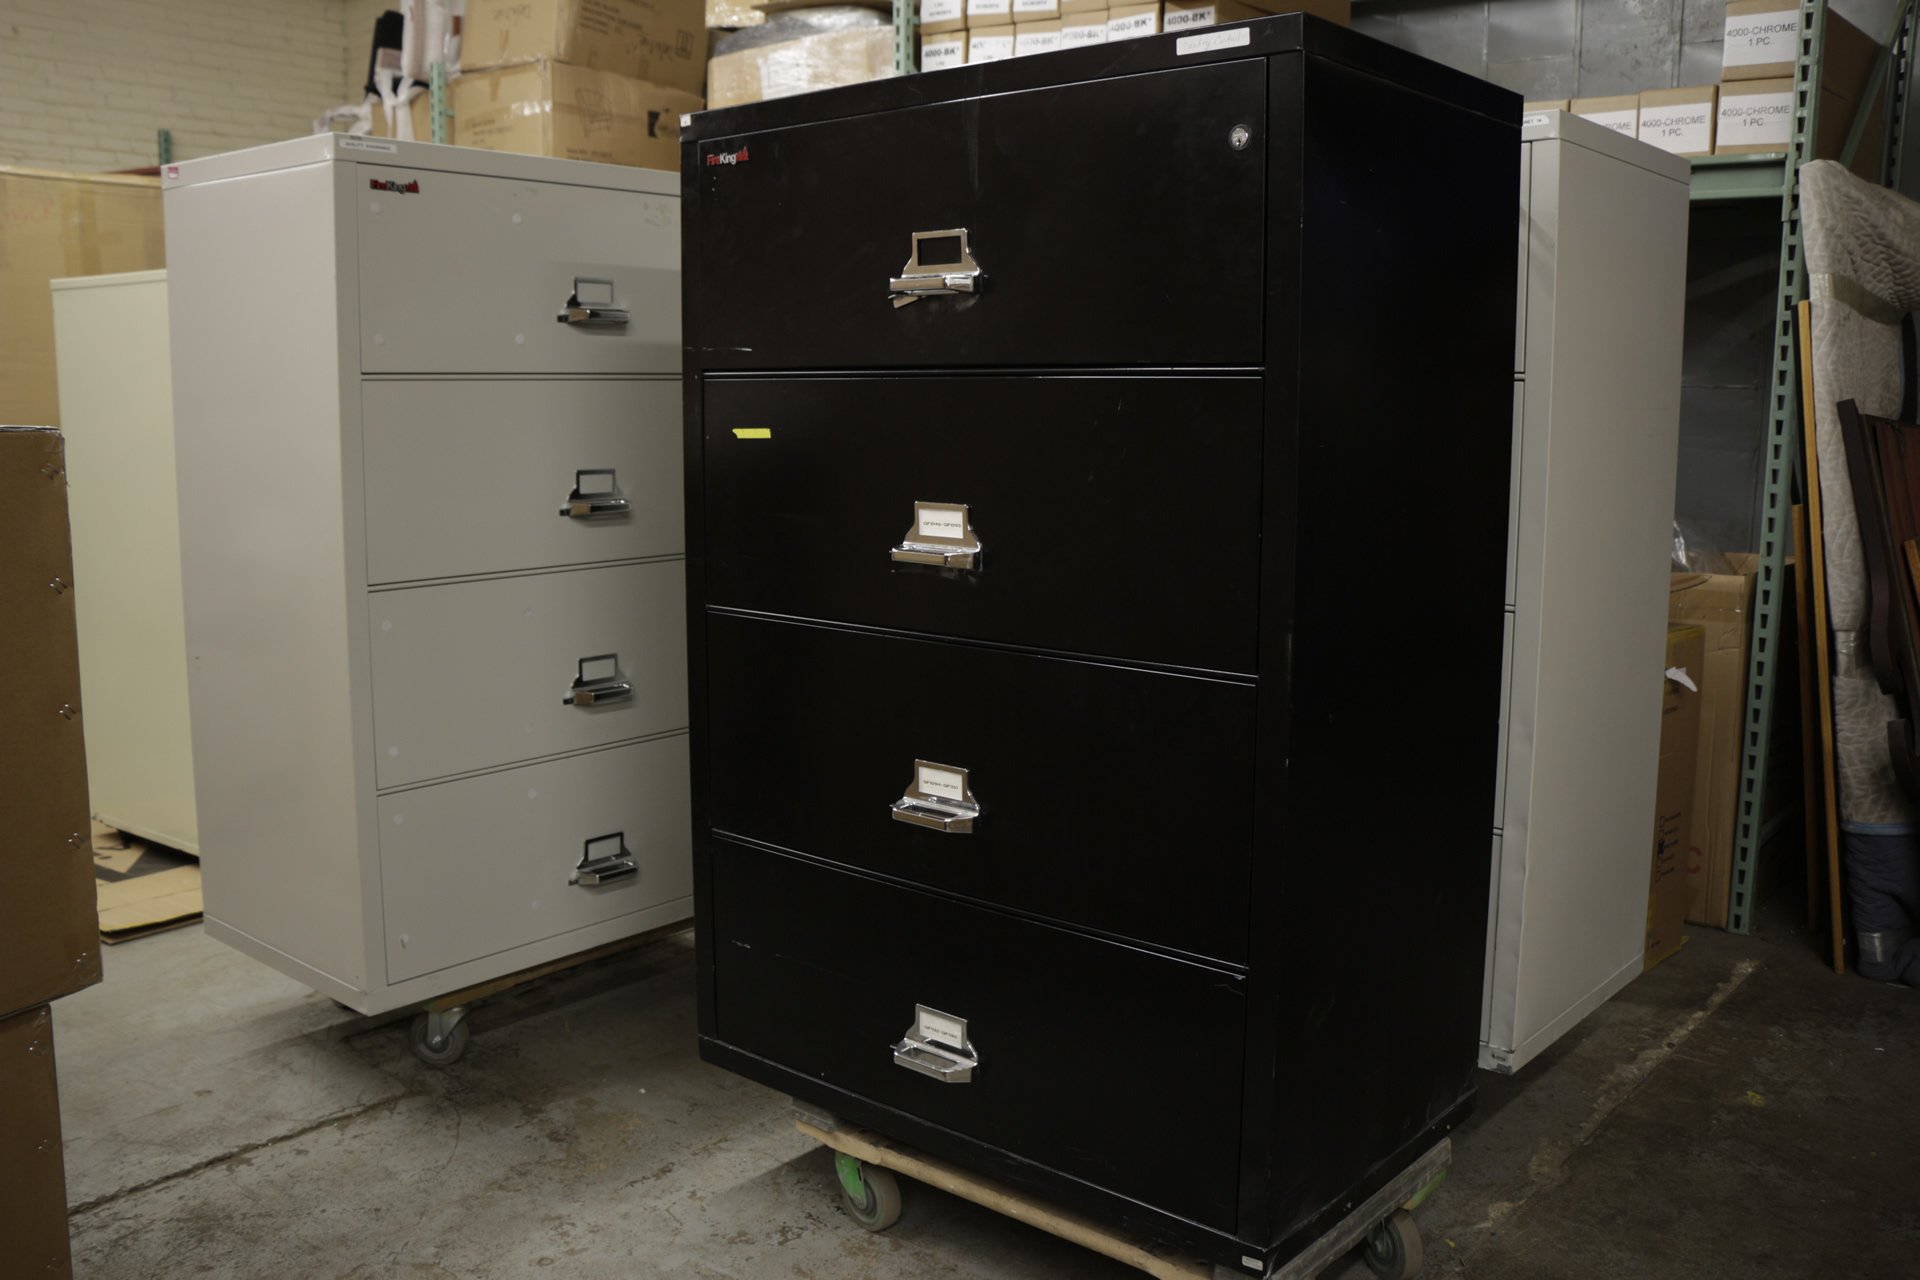 FireKing Four Drawer Lateral File Cabinets in Black or White